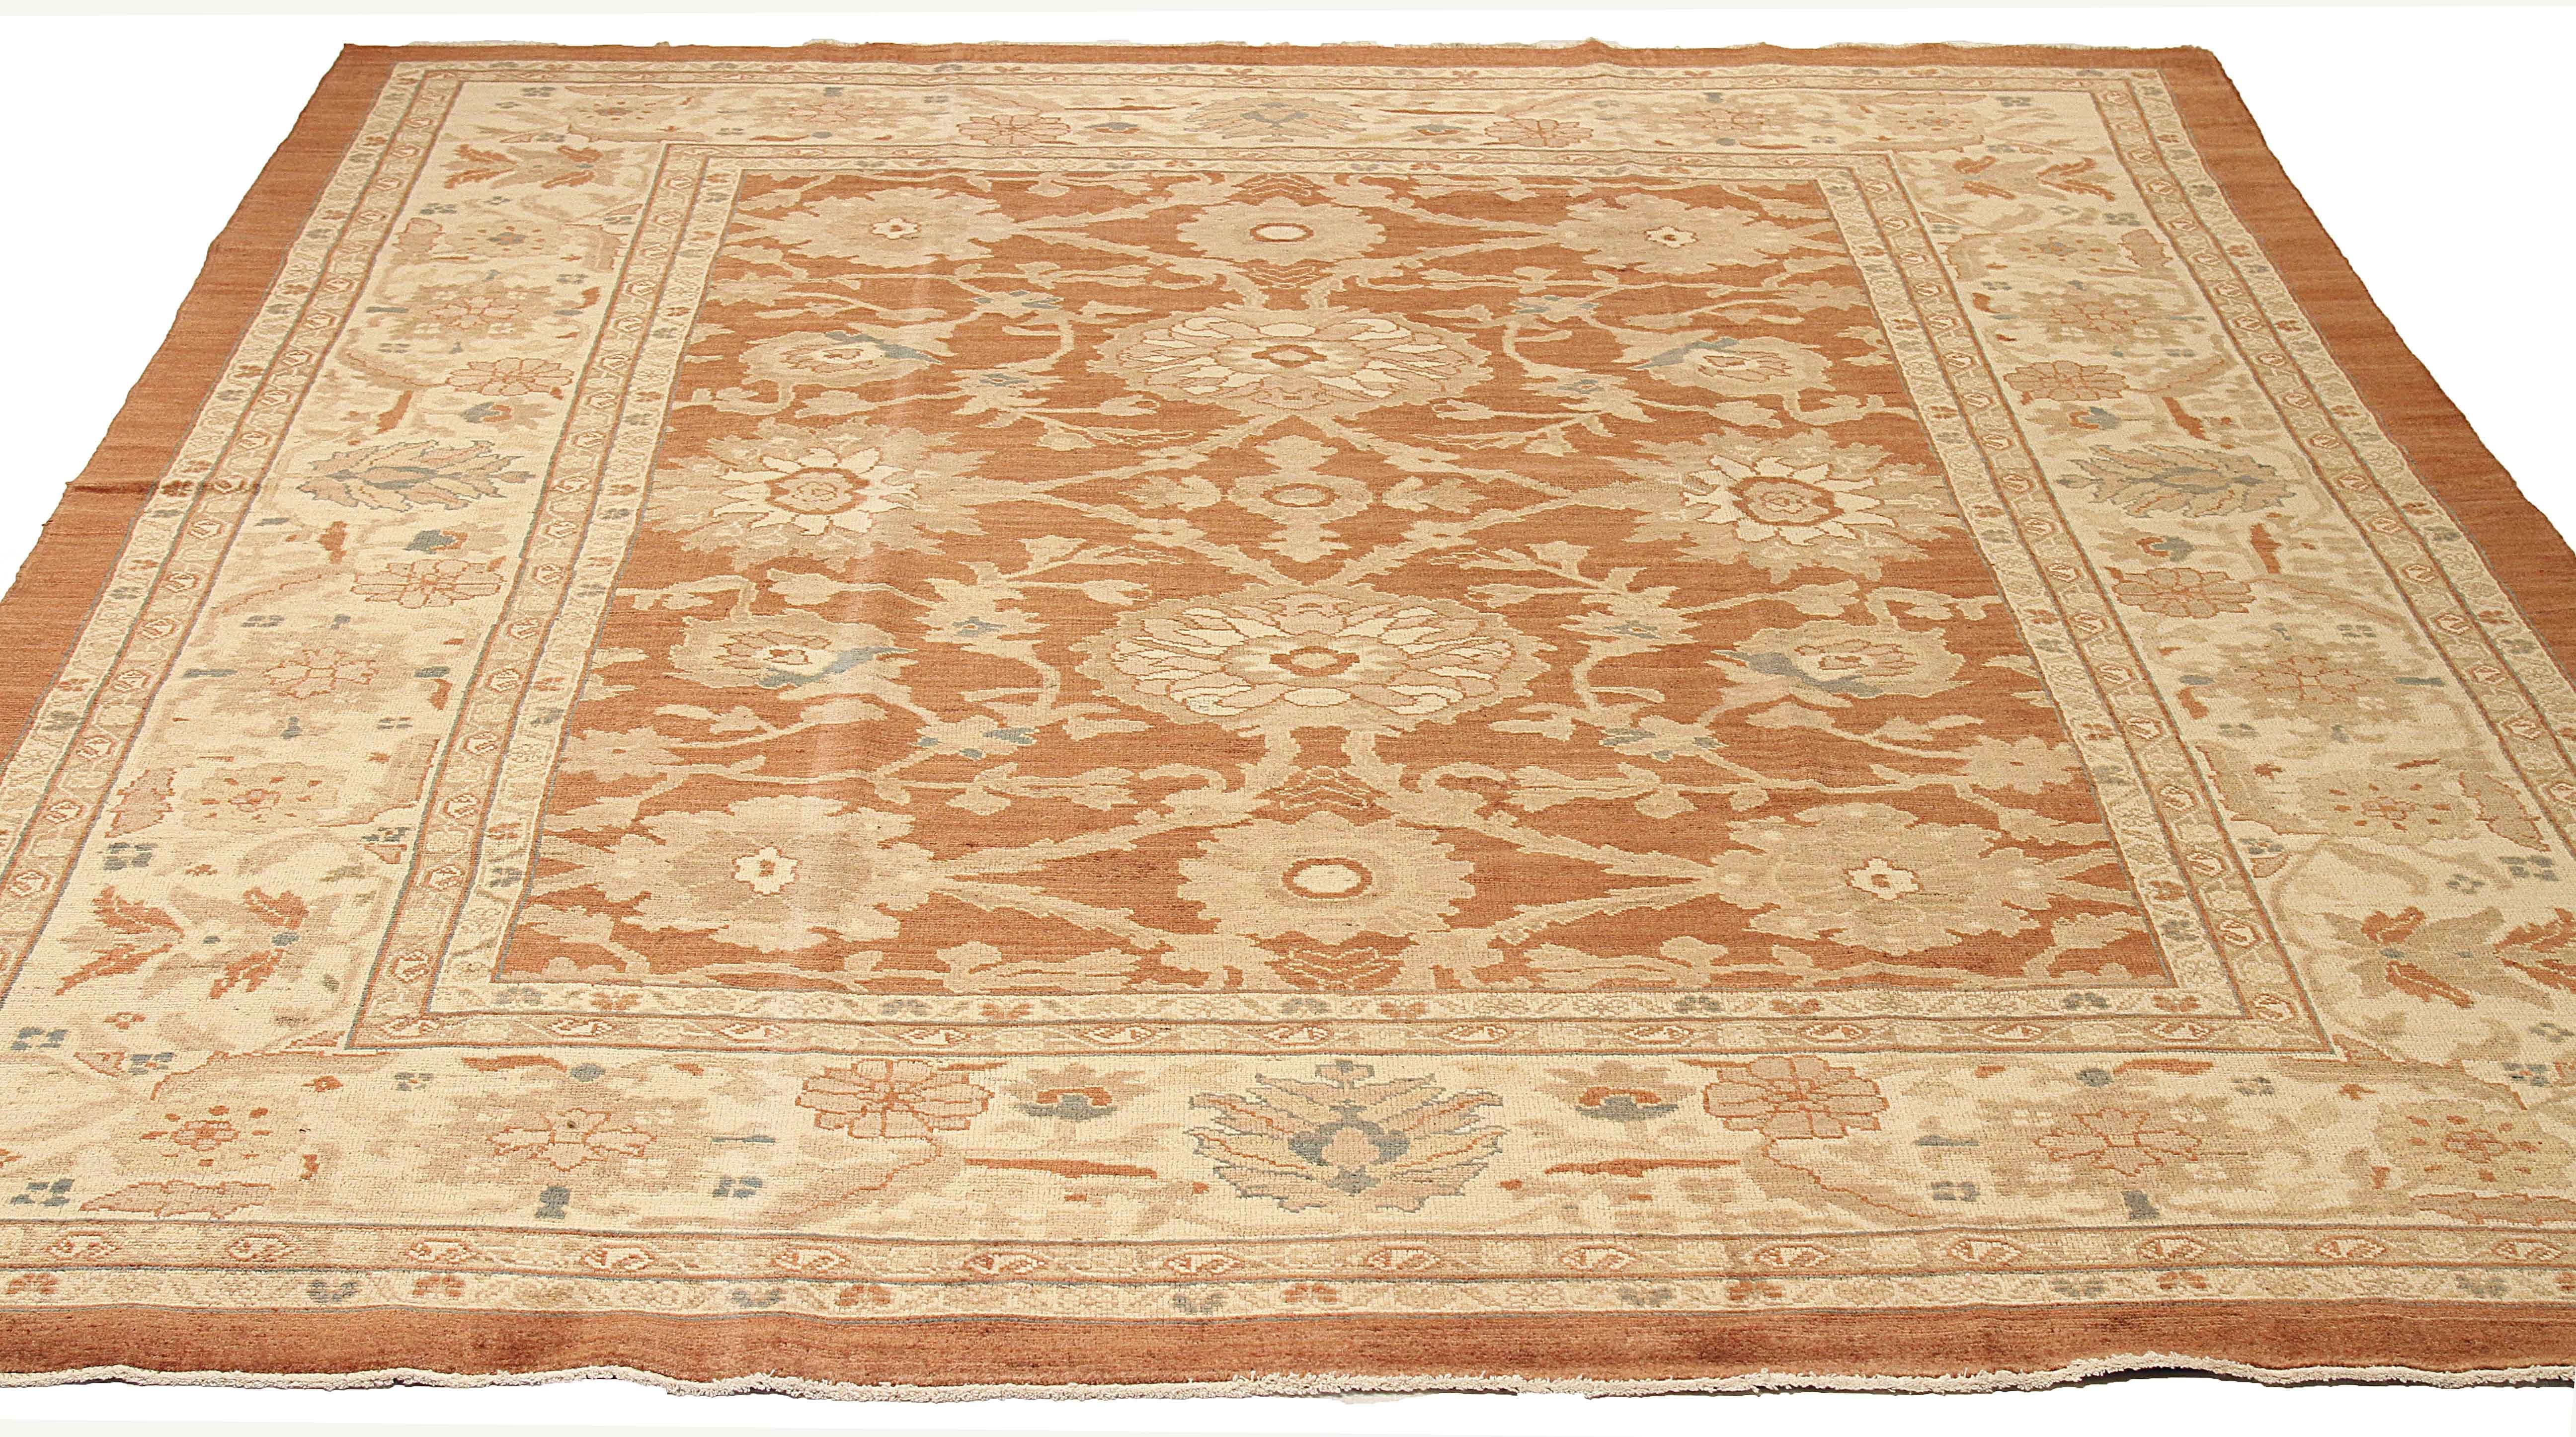 Contemporary handmade Persian area rug from high-quality sheep’s wool and colored with eco-friendly vegetable dyes that are proven safe for humans and pets alike. It’s a Classic Sultanabad design showcasing a regal brown and ivory field with